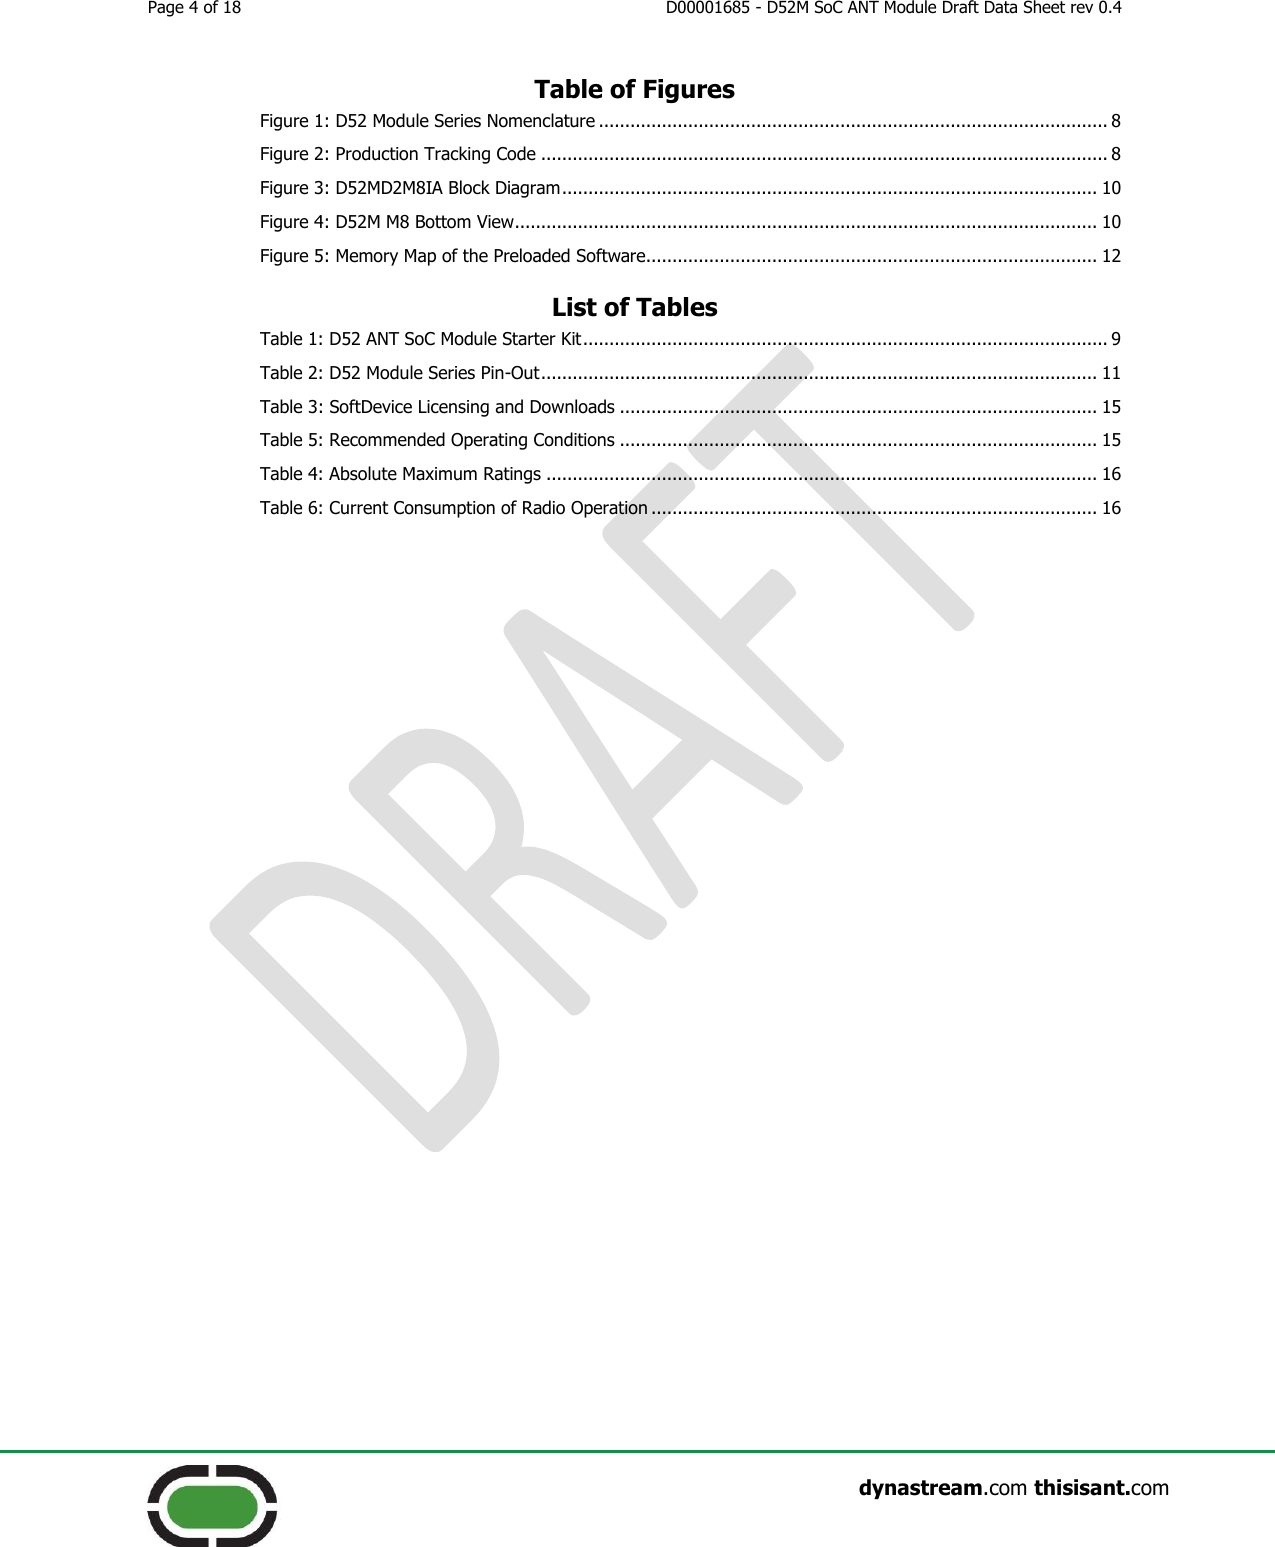 Page 4 of 18  D00001685 - D52M SoC ANT Module Draft Data Sheet rev 0.4                    dynastream.com thisisant.com Table of Figures Figure 1: D52 Module Series Nomenclature ................................................................................................. 8 Figure 2: Production Tracking Code ............................................................................................................ 8 Figure 3: D52MD2M8IA Block Diagram ...................................................................................................... 10 Figure 4: D52M M8 Bottom View ............................................................................................................... 10 Figure 5: Memory Map of the Preloaded Software...................................................................................... 12 List of Tables Table 1: D52 ANT SoC Module Starter Kit .................................................................................................... 9 Table 2: D52 Module Series Pin-Out .......................................................................................................... 11 Table 3: SoftDevice Licensing and Downloads ........................................................................................... 15 Table 5: Recommended Operating Conditions ........................................................................................... 15 Table 4: Absolute Maximum Ratings ......................................................................................................... 16 Table 6: Current Consumption of Radio Operation ..................................................................................... 16    